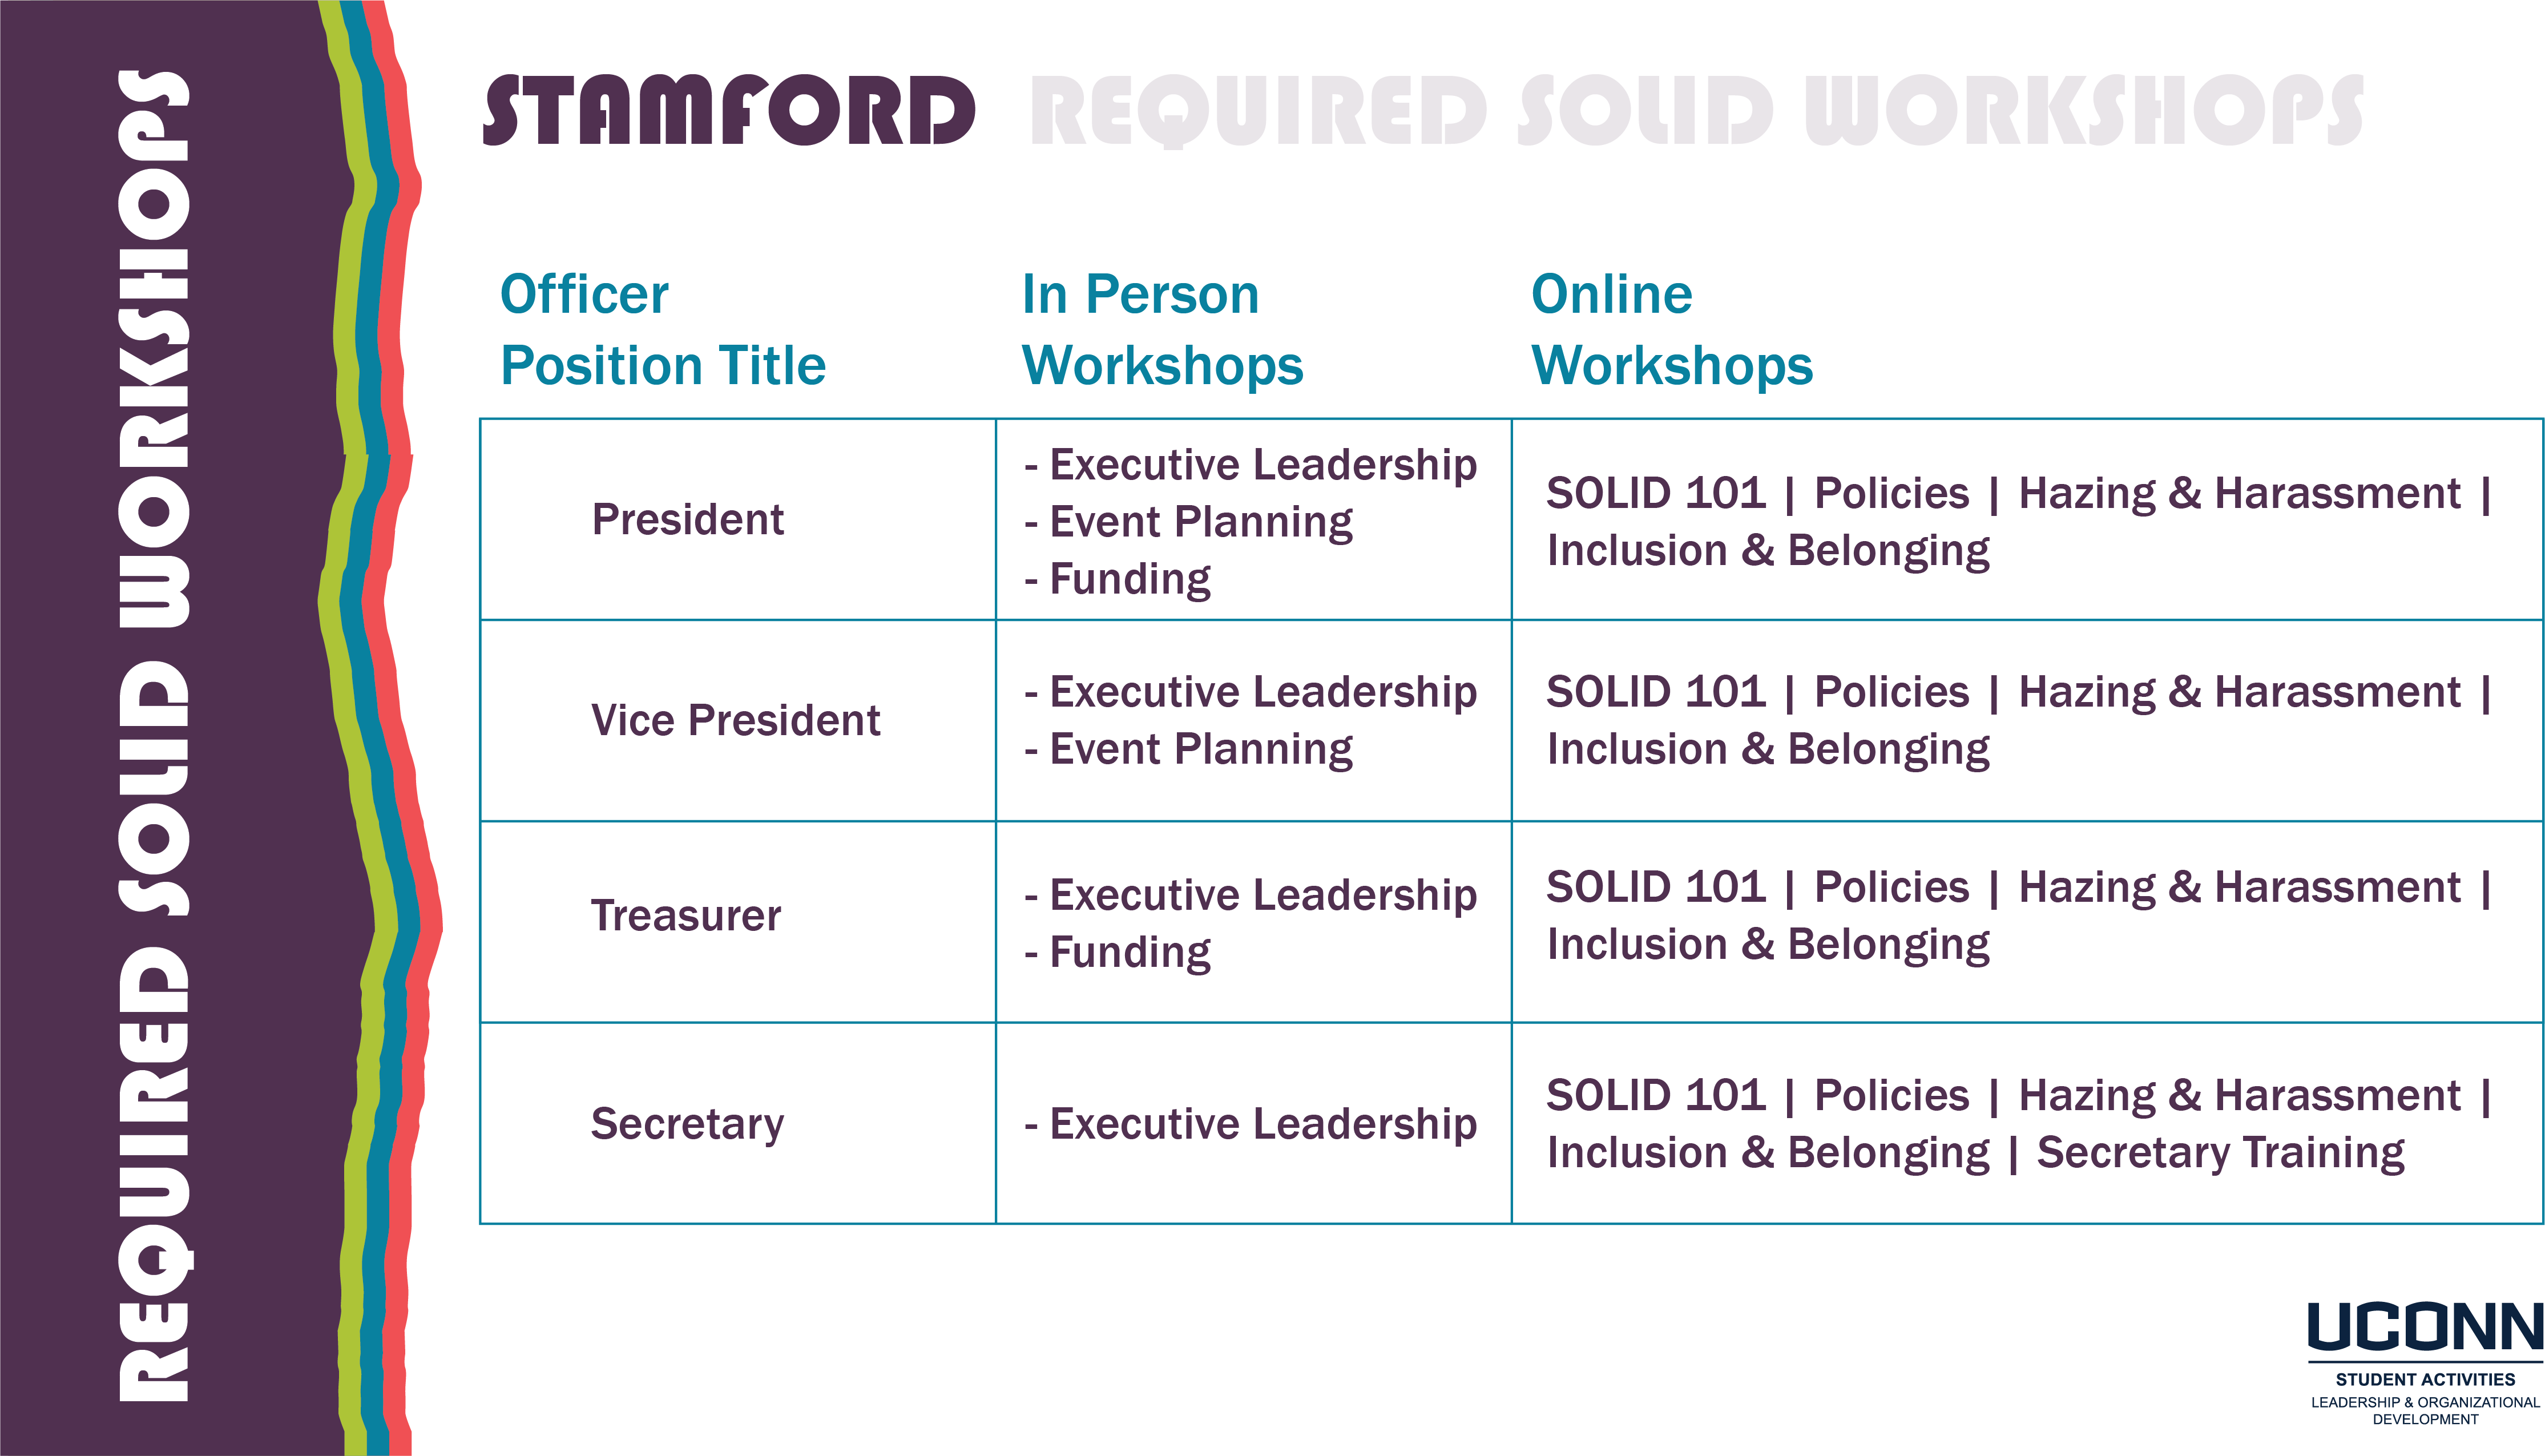 Stamford SOLID Workshop Requirements Image (read below for text)